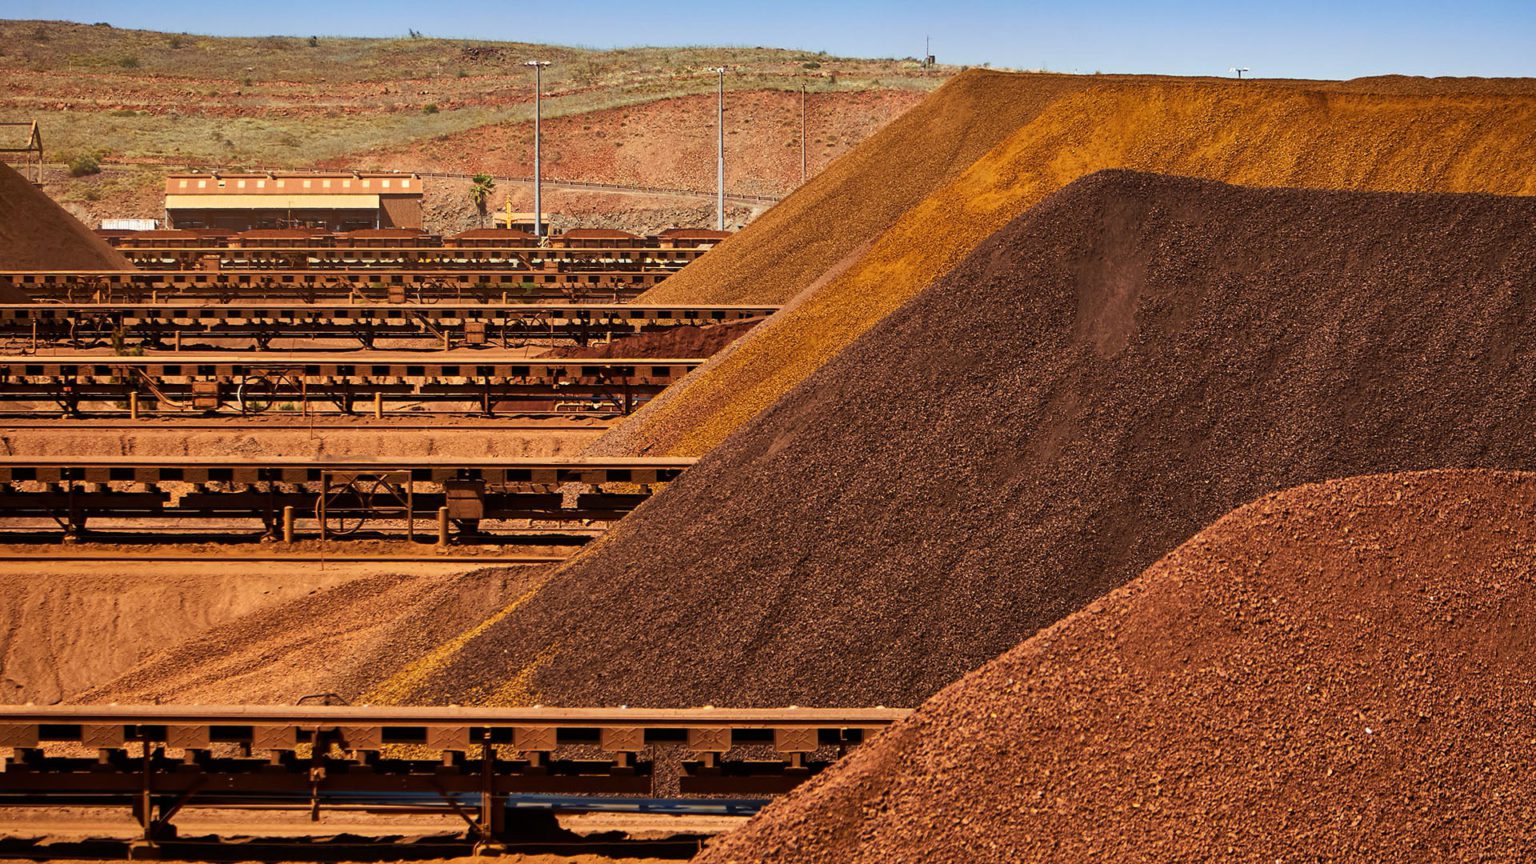 Iron ore price falls to lowest in 18 months on dismal demand outlook